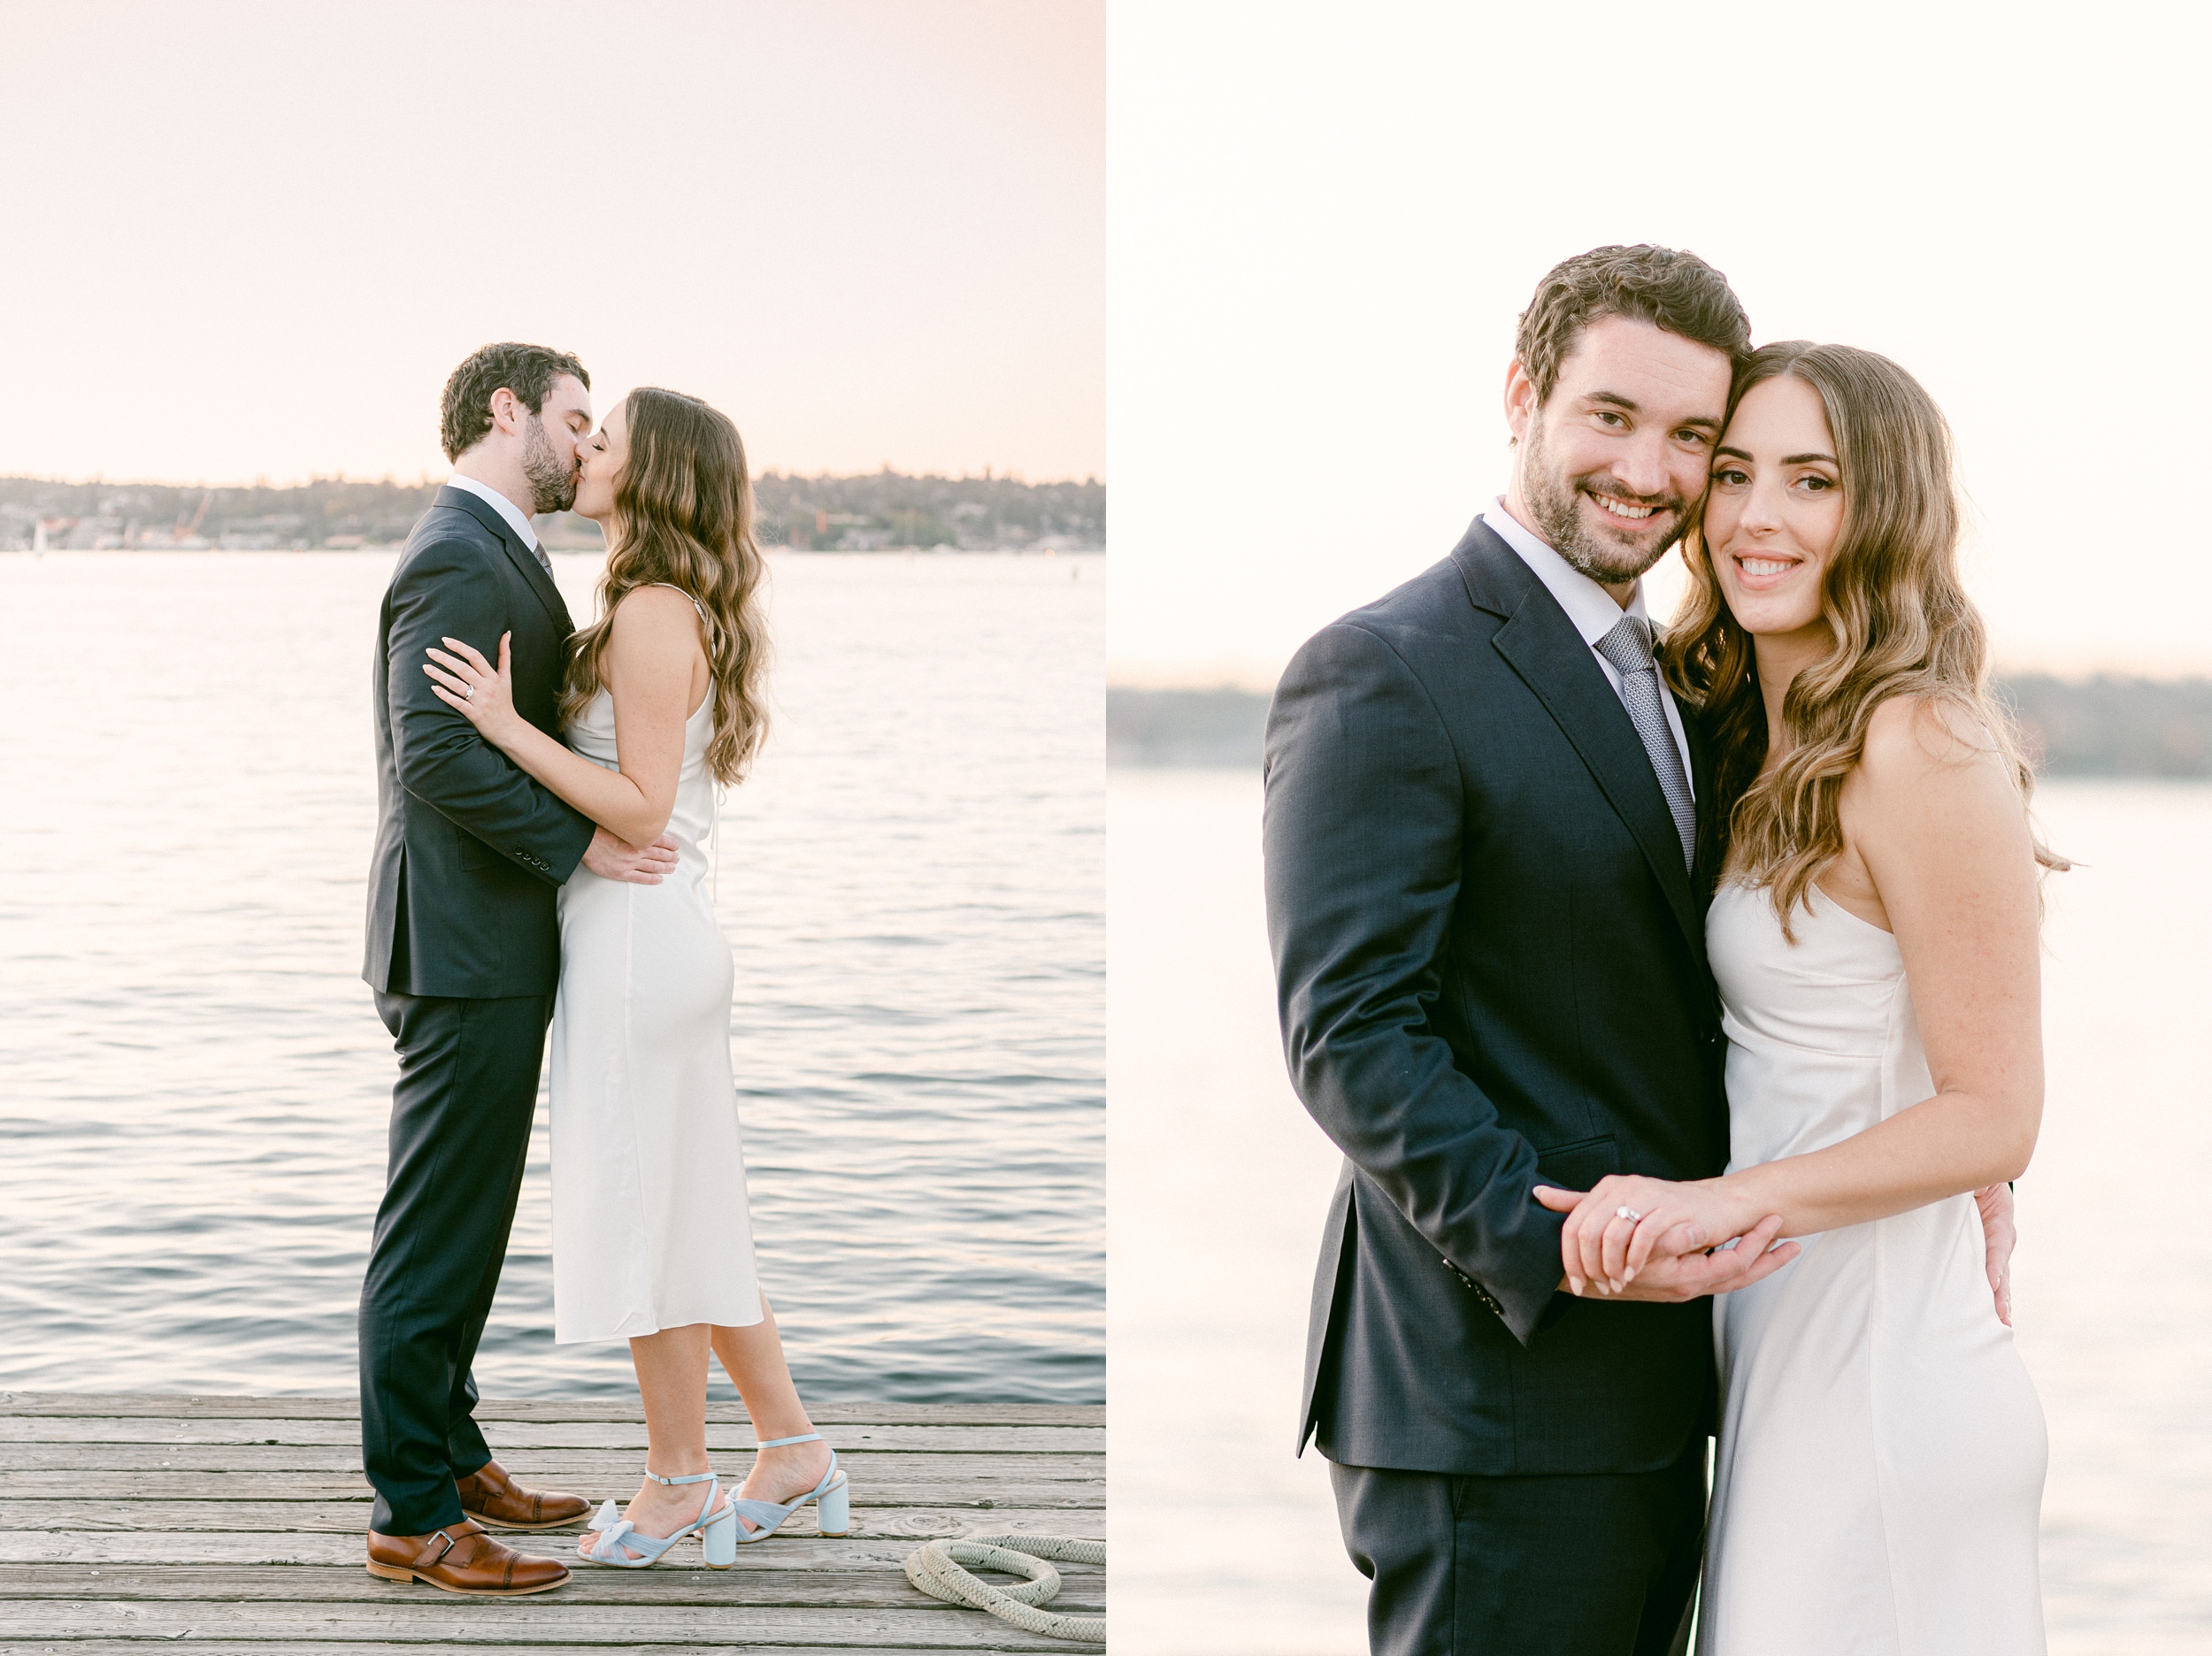 Fine Art Weddings in Seattle Washington. The Center for Wooden Boats, bride and groom at the end of the dock taking couples' portraits. The sun has set and the lighting is soft. They are smiling and have a post-wedding glow. Loeffler Randall Shoes make another appearance.